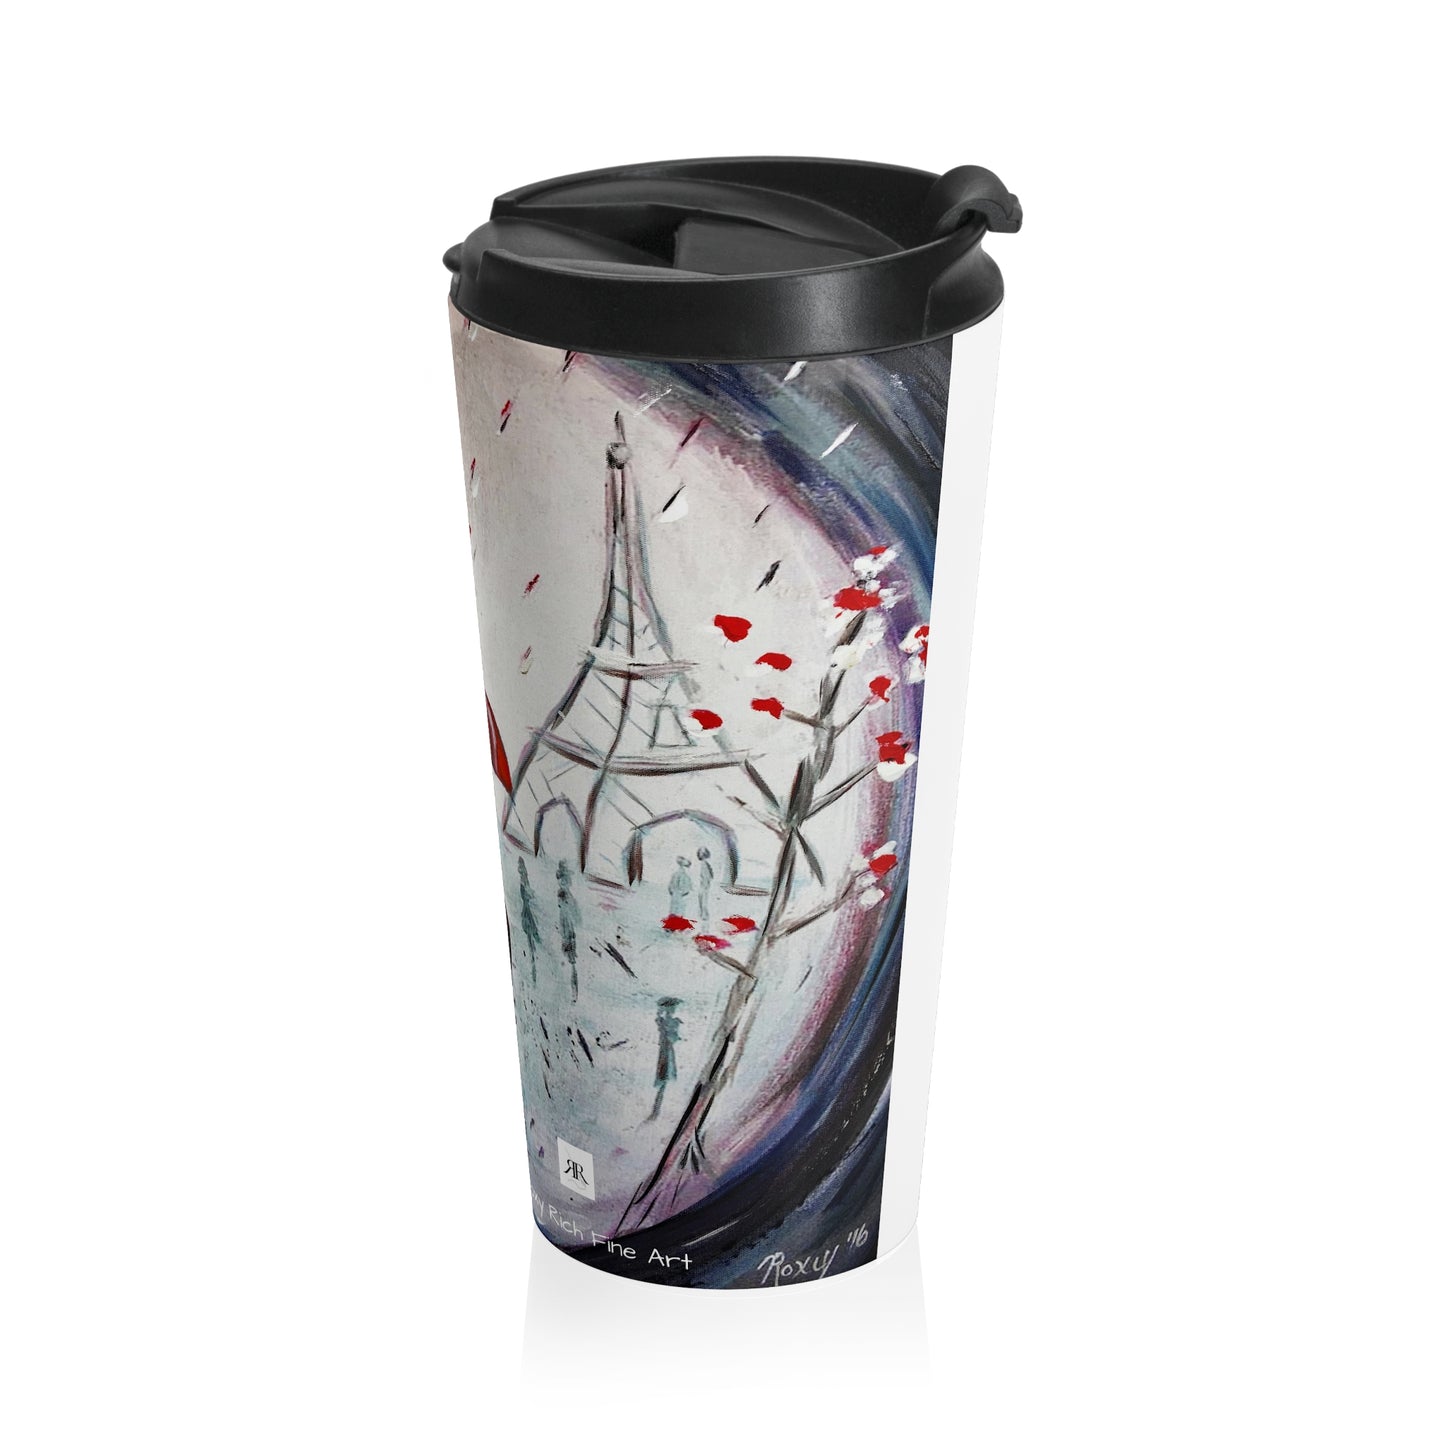 I only have eyes for You Couple in Paris Romantic Stainless Steel Travel Mug